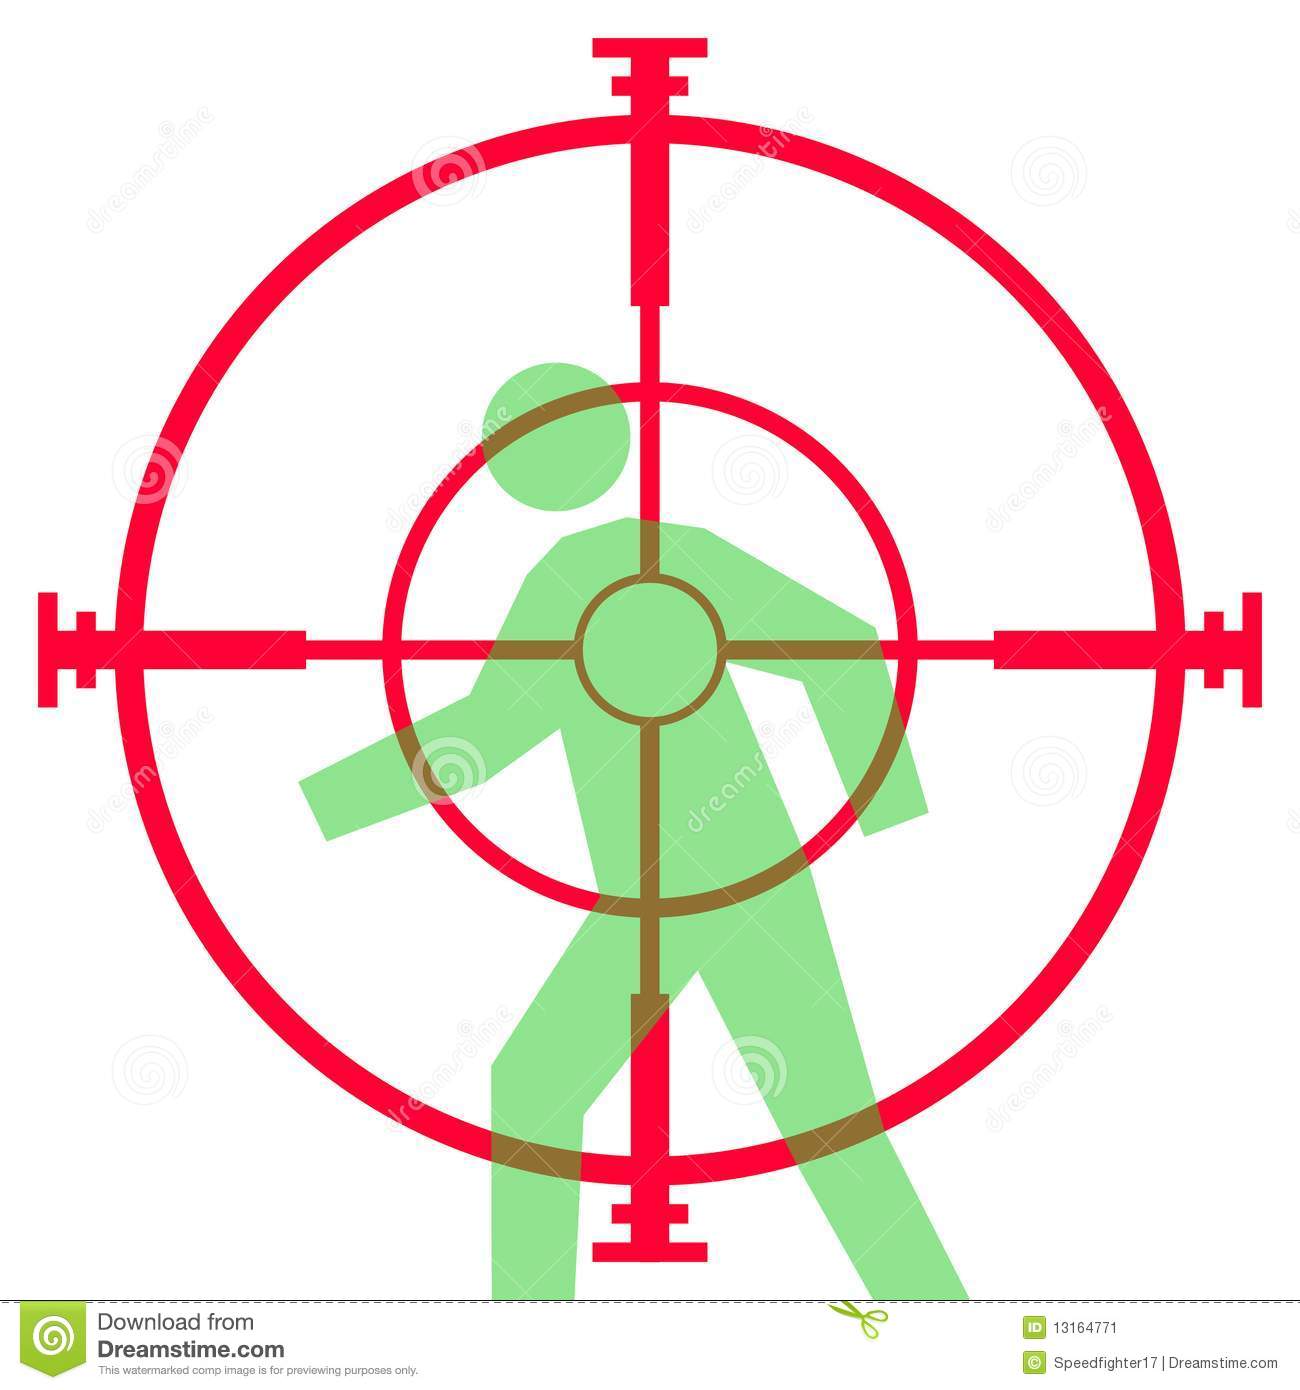 Illustration Of Sniper Rifle Sight Or Scope Aiming At Human Target